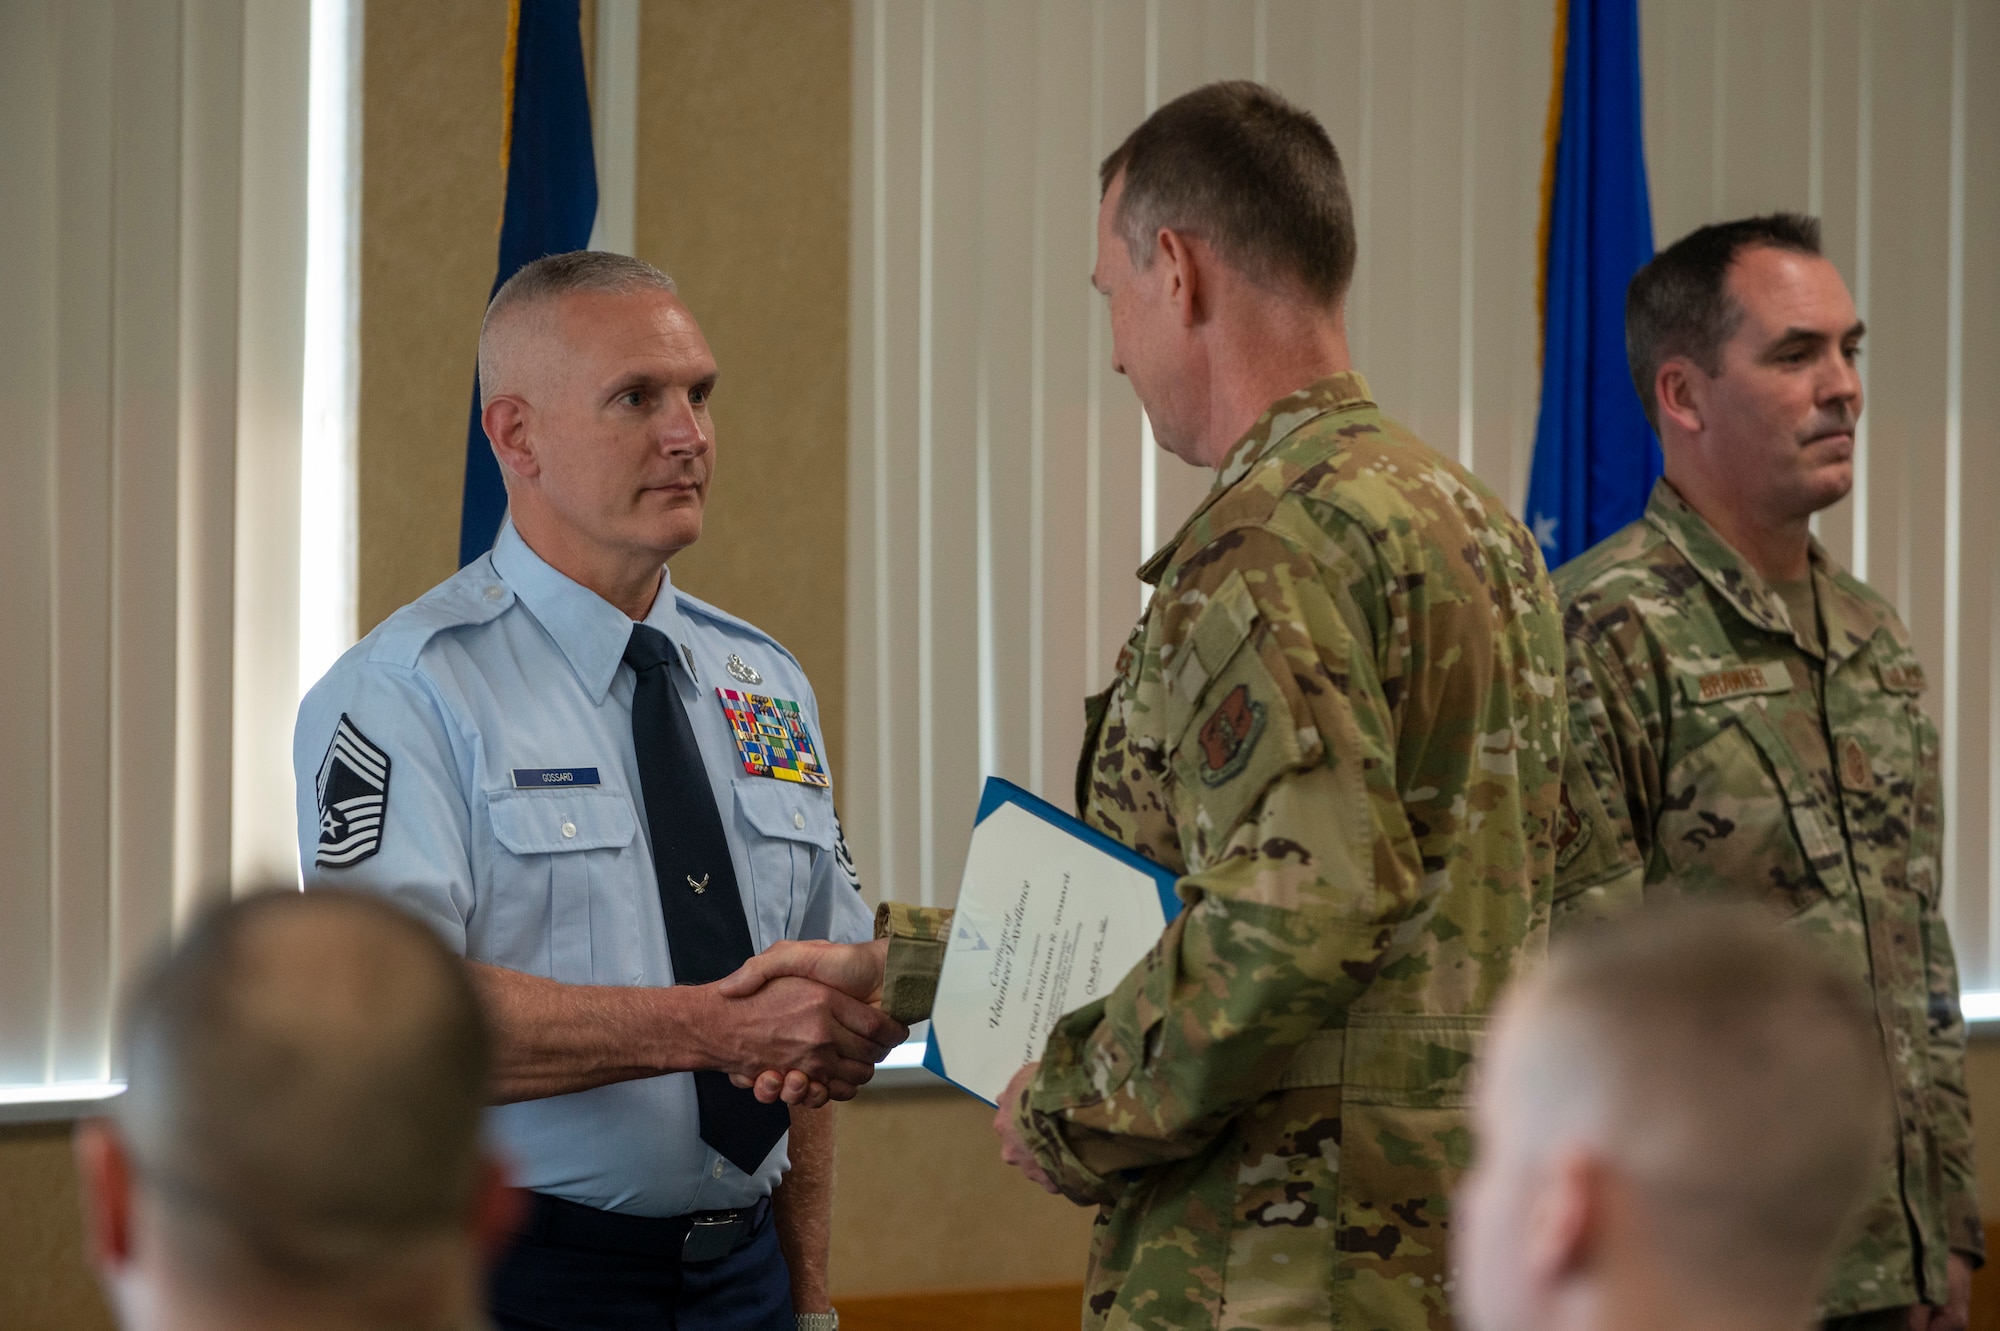 Retired U.S. Air Force Chief Master Sgt. Robert Gossard is awarded the Volunteer of The Year award by Col. Christopher Sigler, acting 167th Airlift Wing commander,  during the Outstanding Airmen of the Year  ceremony at the the 167th base dining facility, Martinsburg, West Virginia, Apr. 2, 2022. The award was presented to him for selflessly contributing more than 400 work hours in 2021 through leading and mentoring the 167th student flight